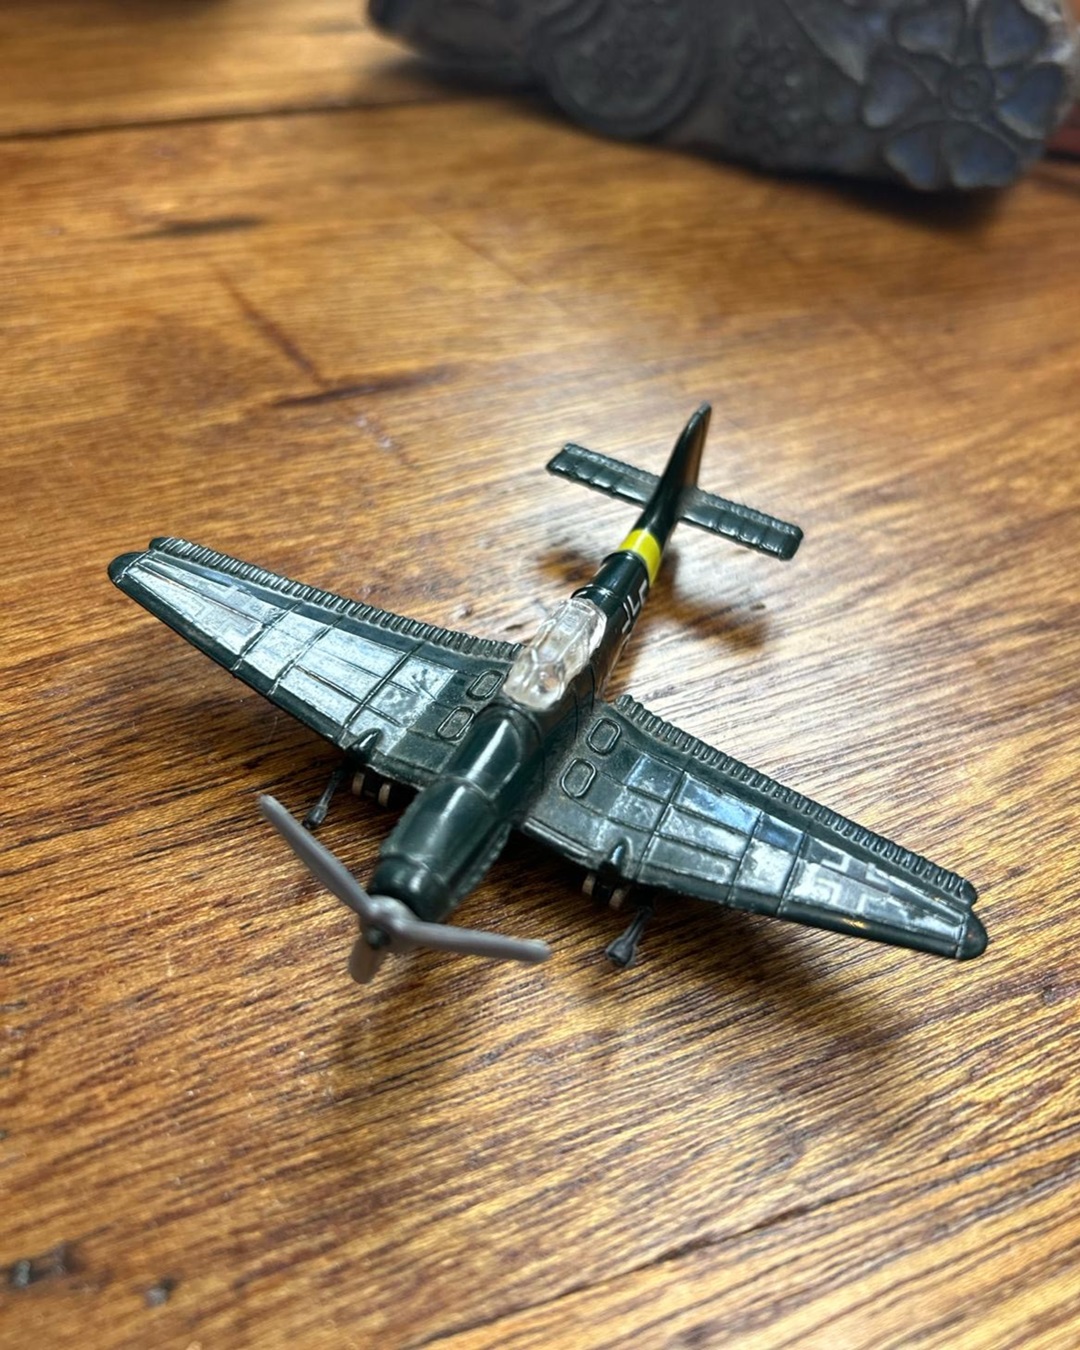 Vintae Dyna Flites plane collectable on wooden table